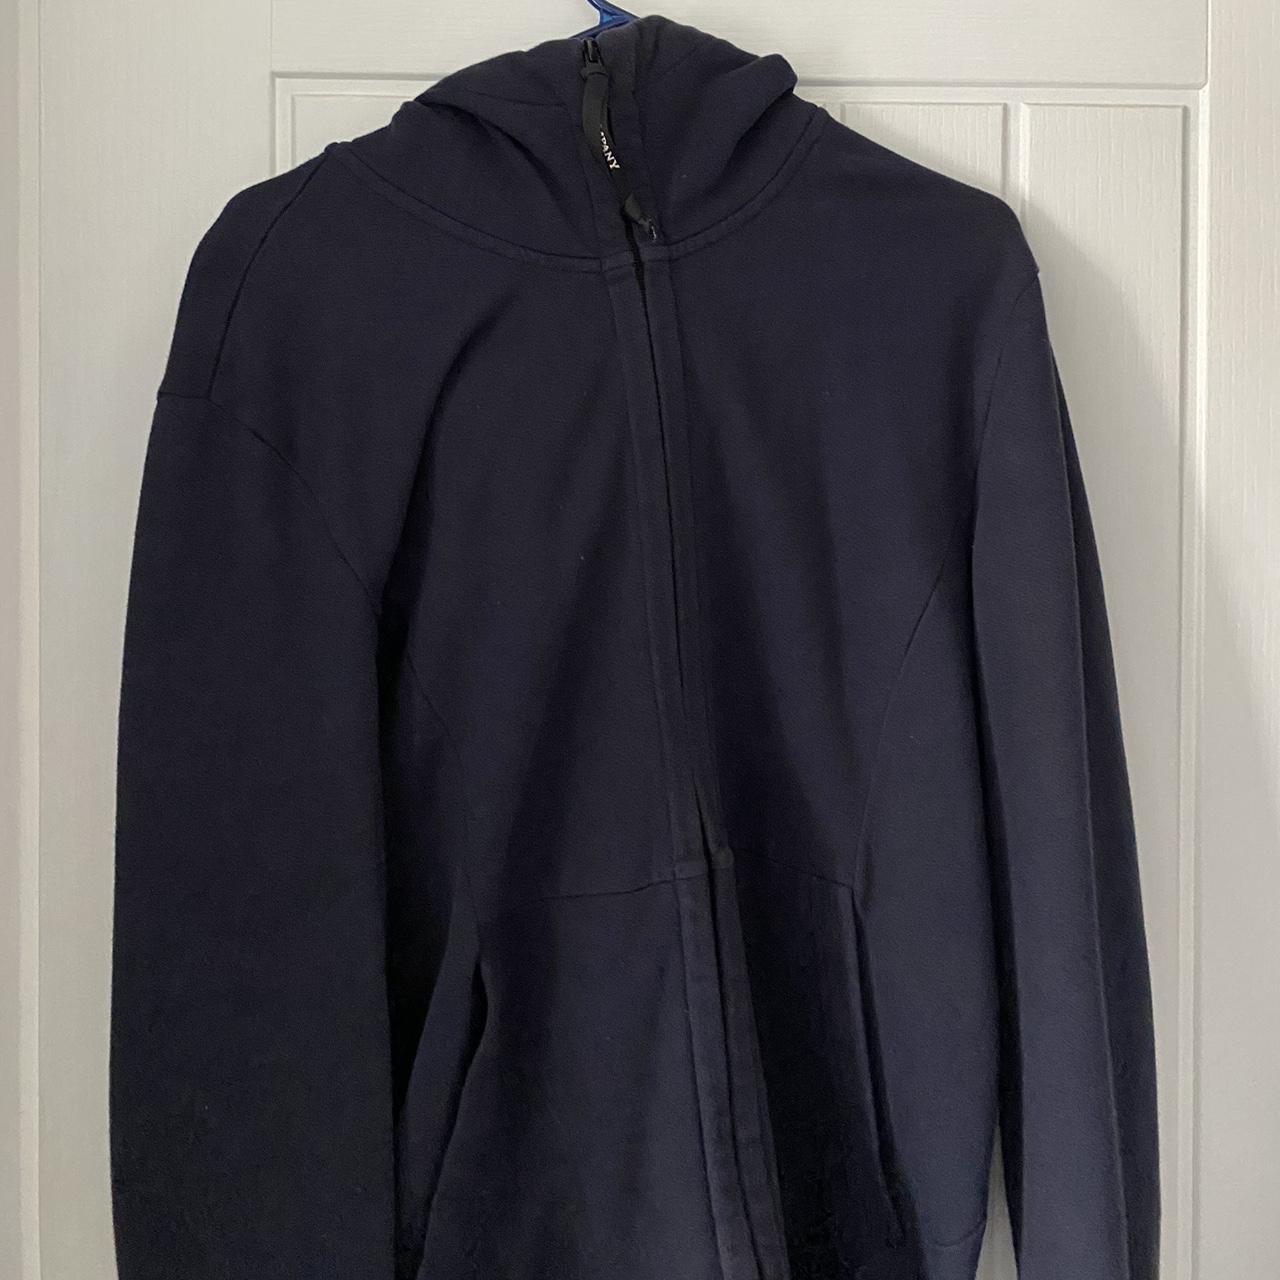 CP Company Goggle zip Hoodie Navy blue colour Size... - Depop